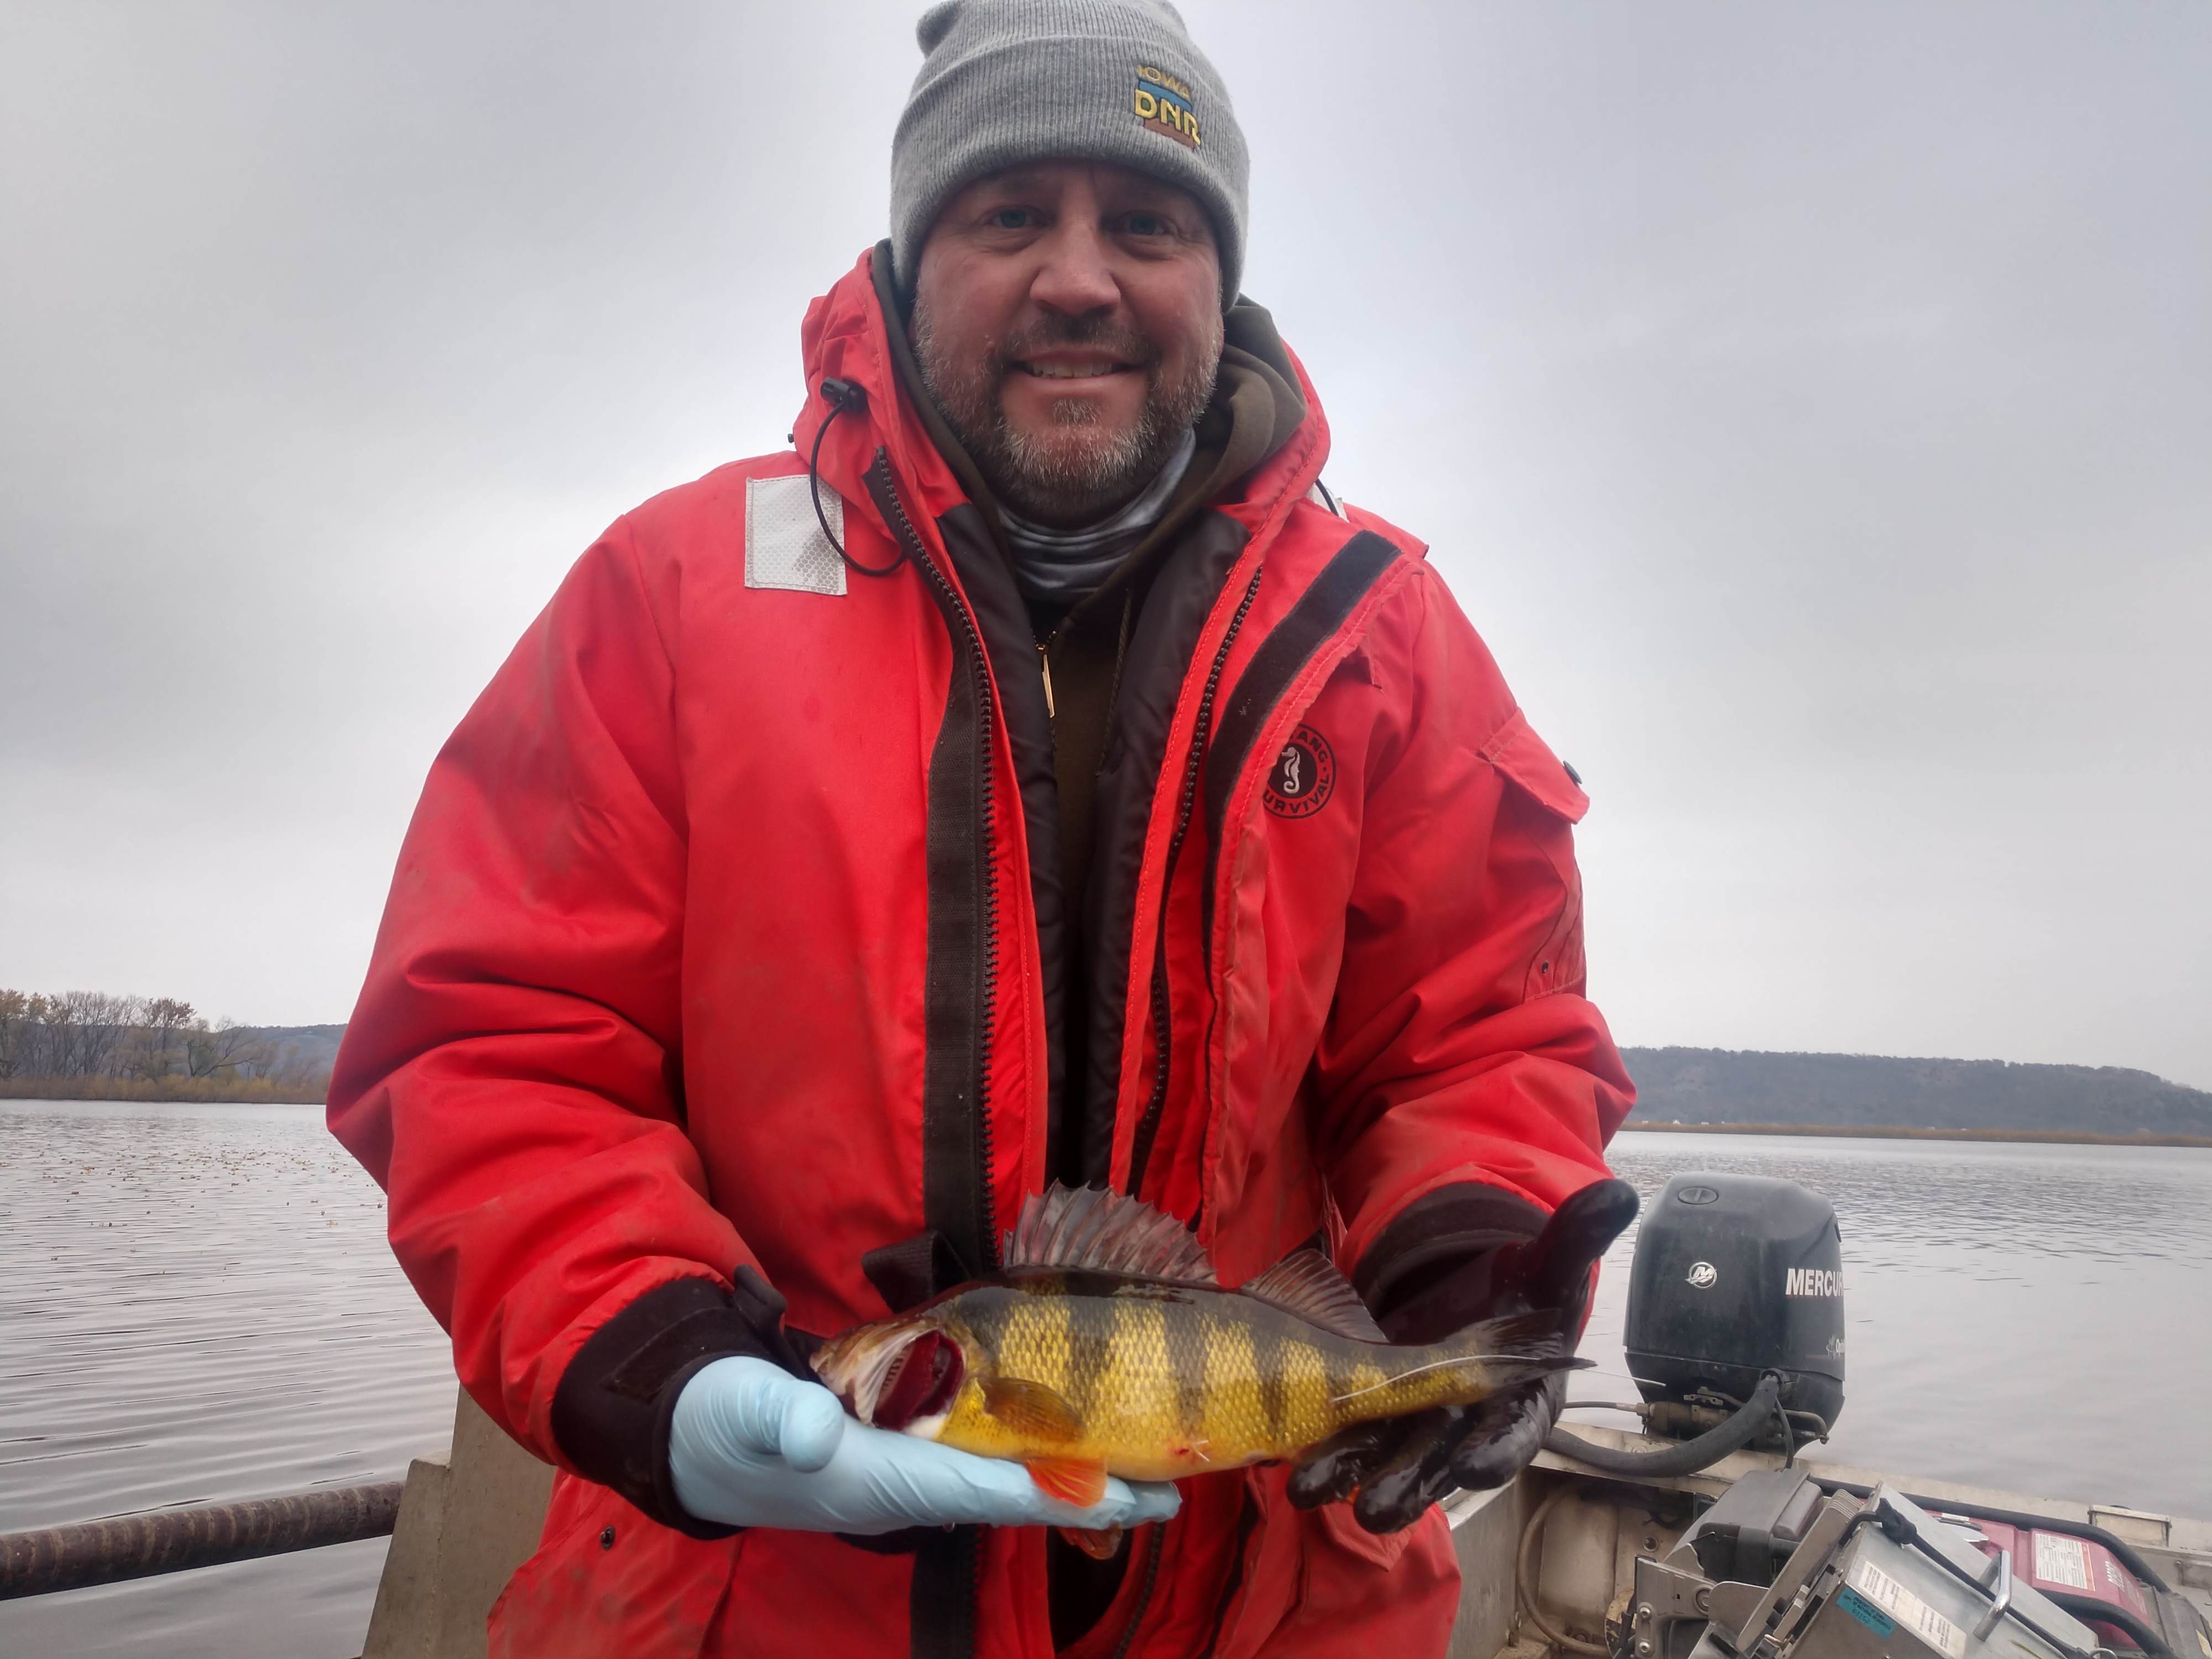 A fisheries employee holding a tagged yellow perch.